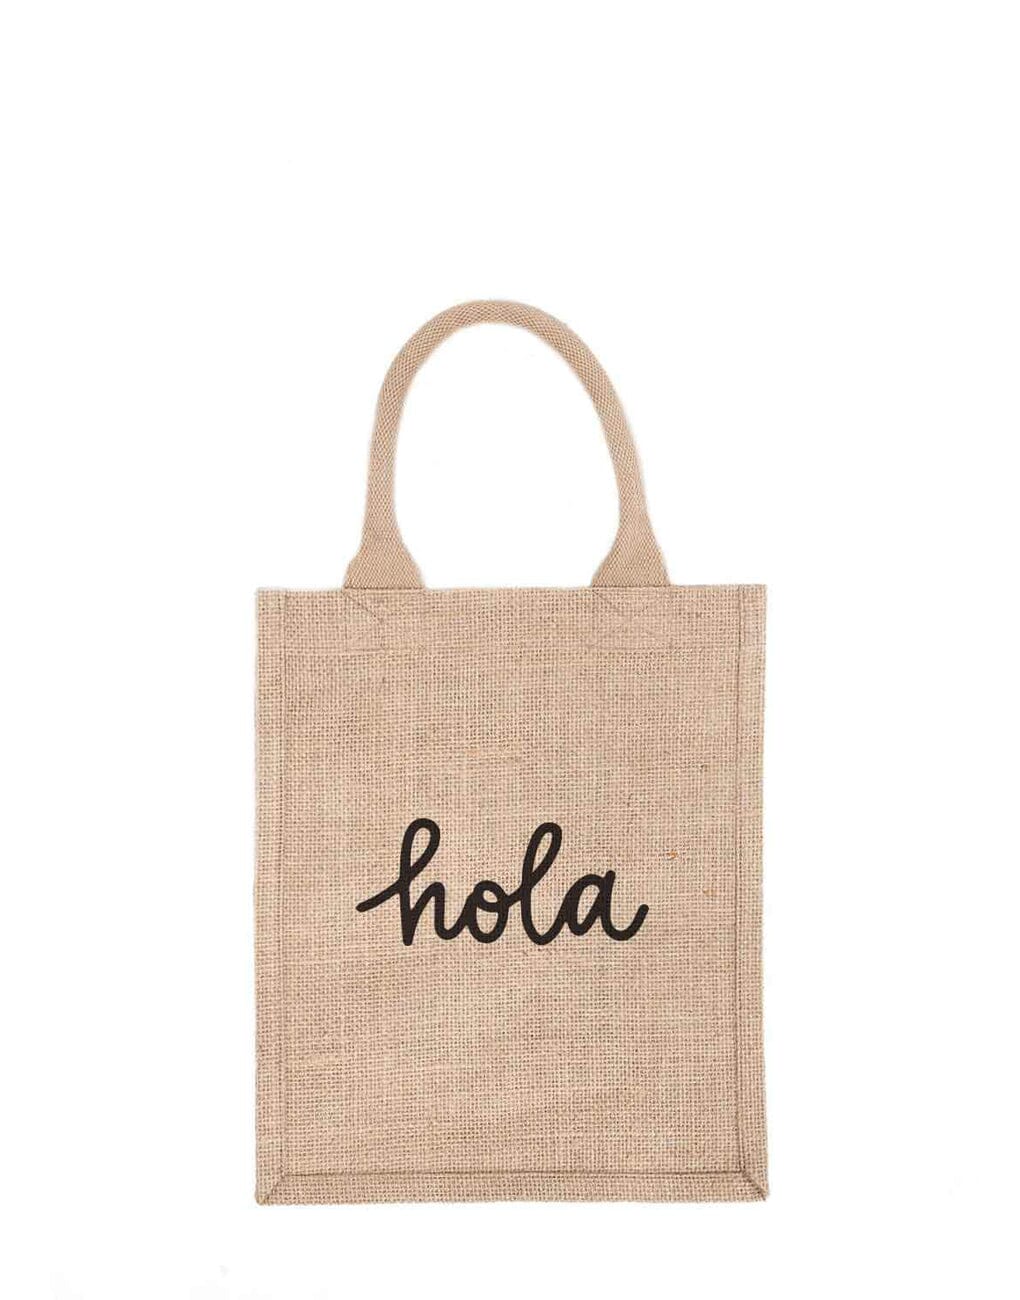 Personalised Tote Bag Canvas Cotton Shopper Shopping Any Name Custom Gift